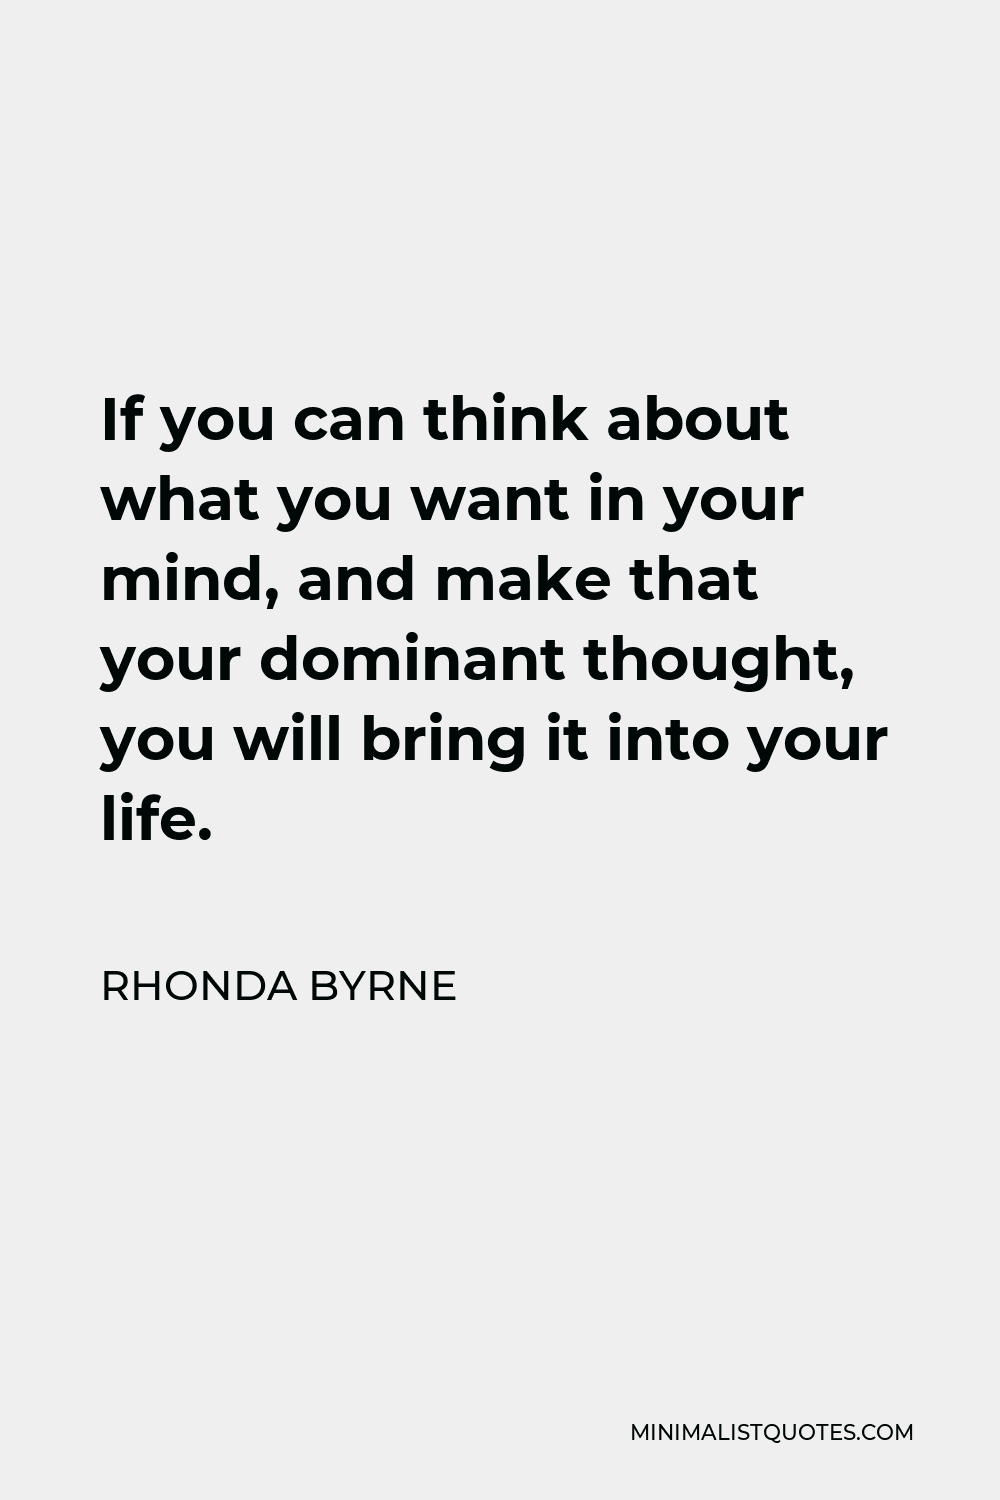 Rhonda Byrne Quote - If you can think about what you want in your mind, and make that your dominant thought, you will bring it into your life.